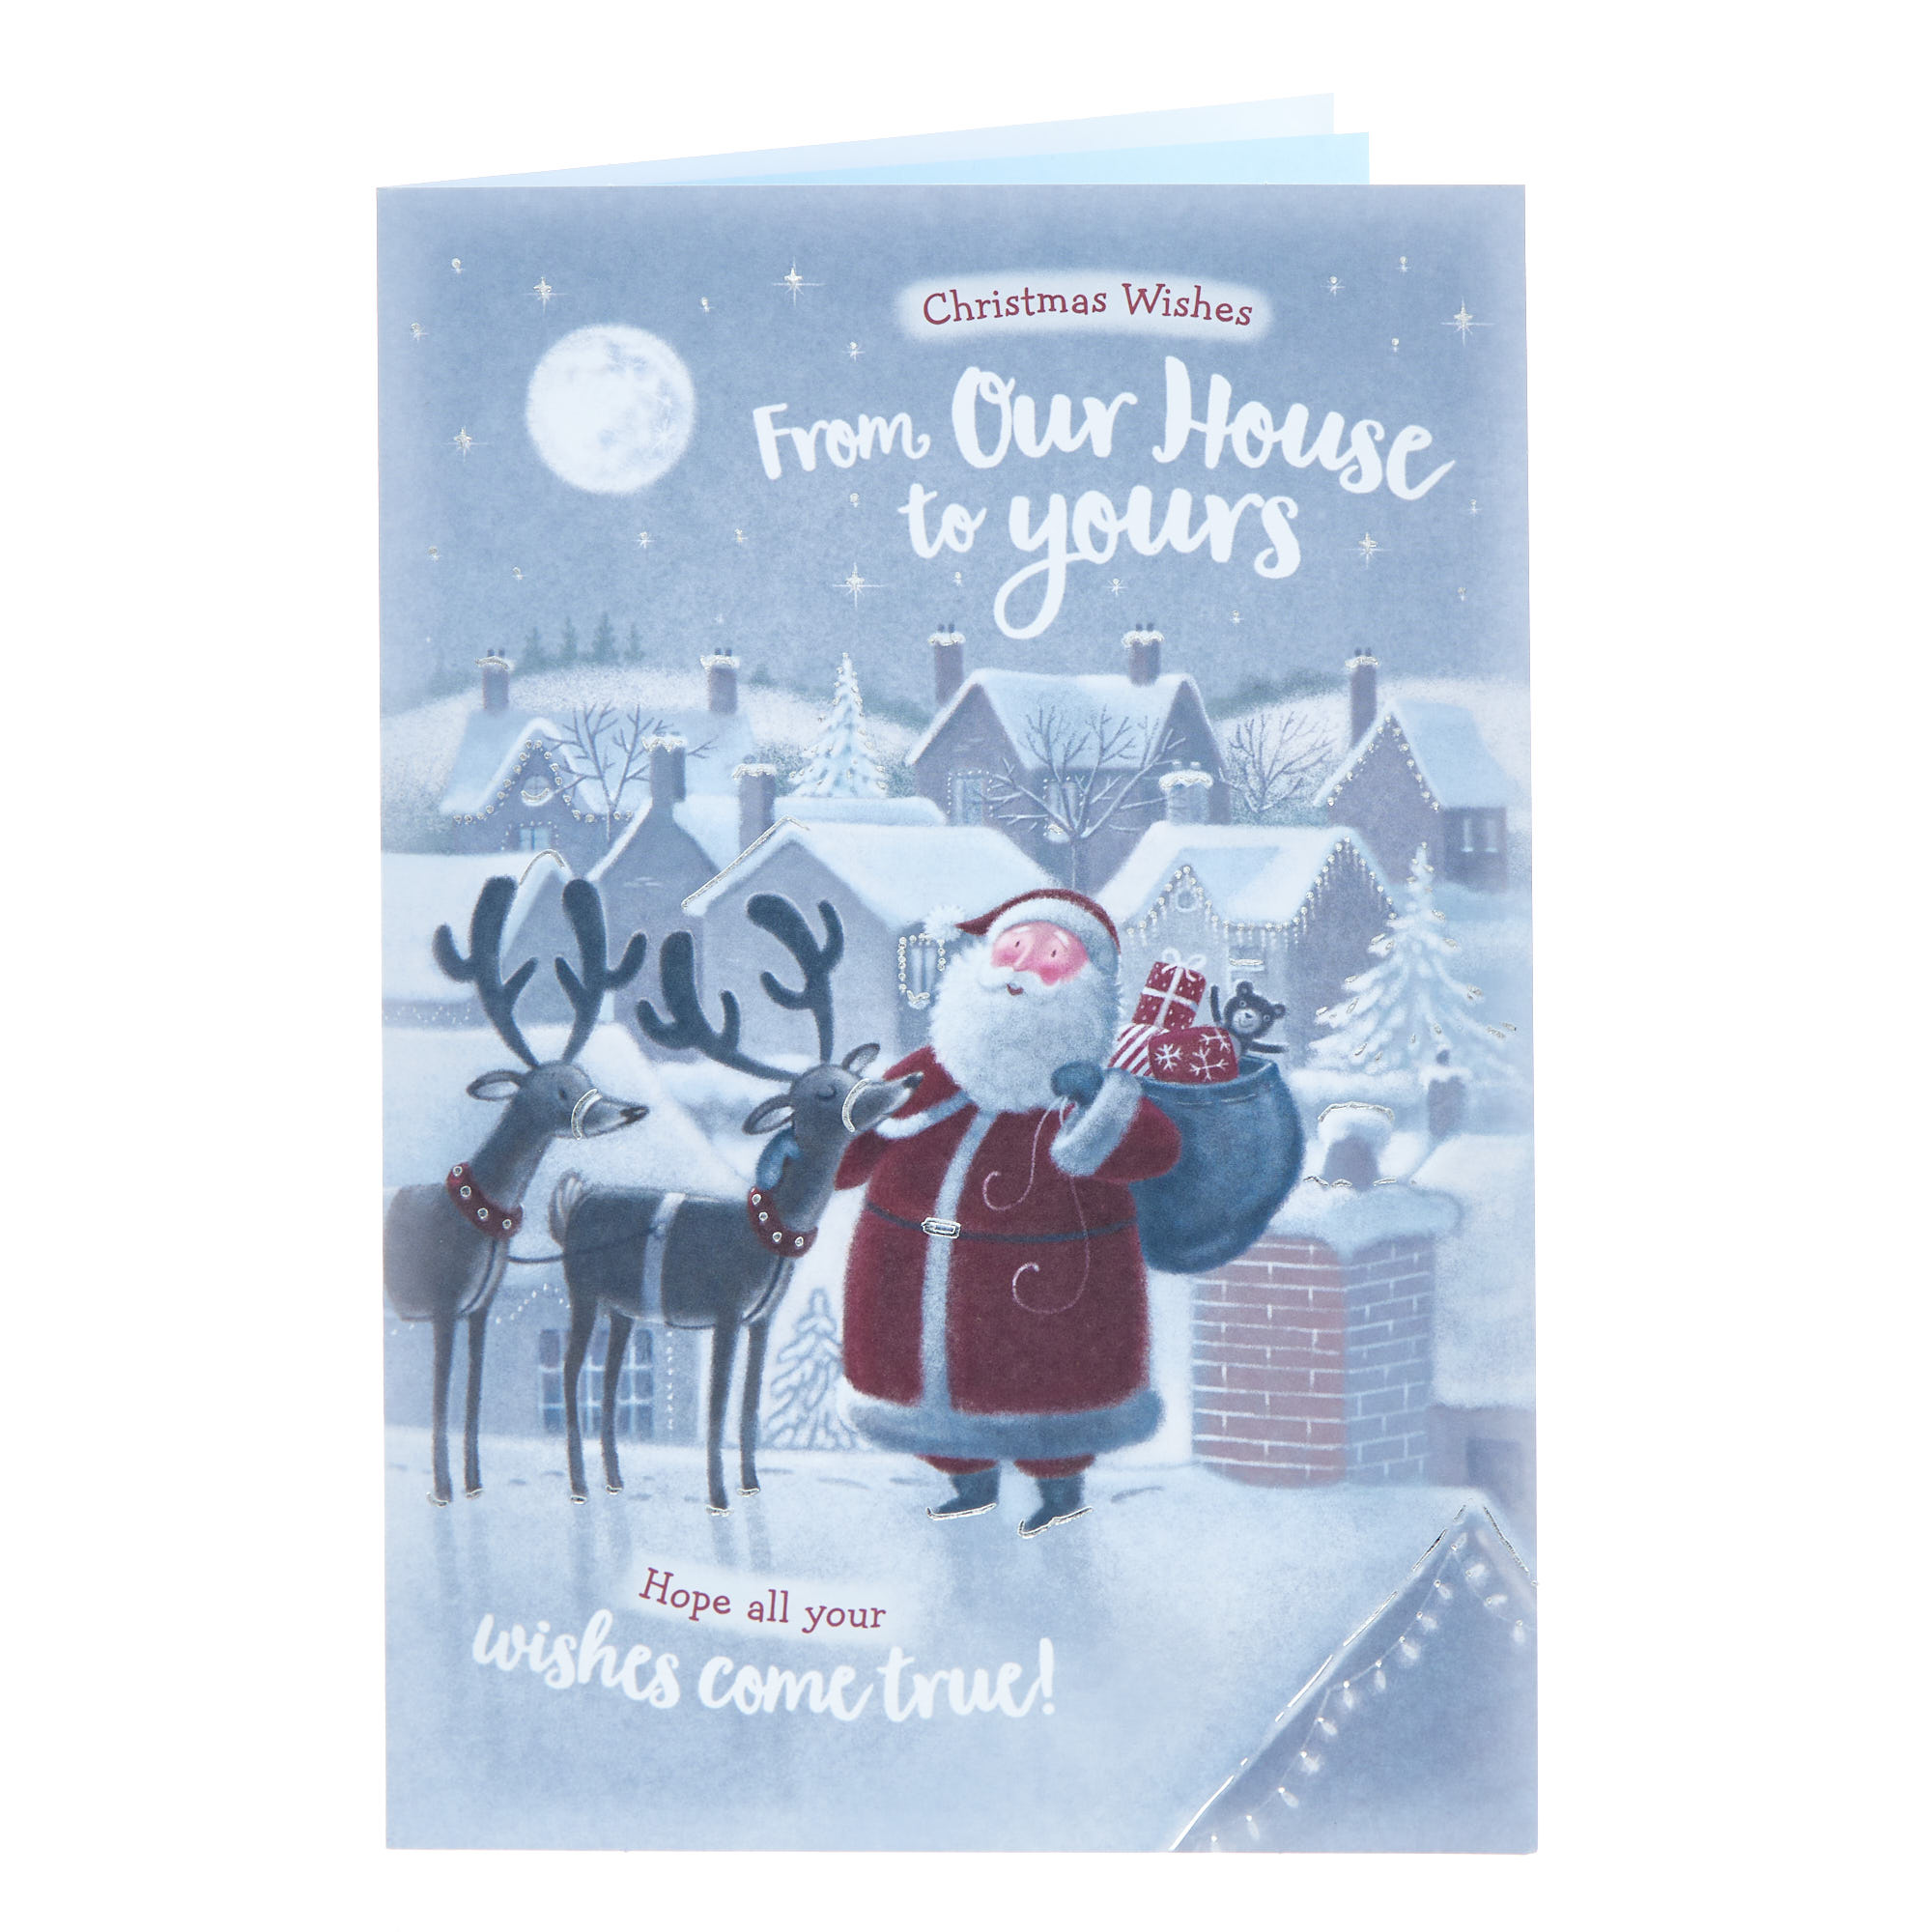 From Our House To Your Santa On A Roof Christmas Card